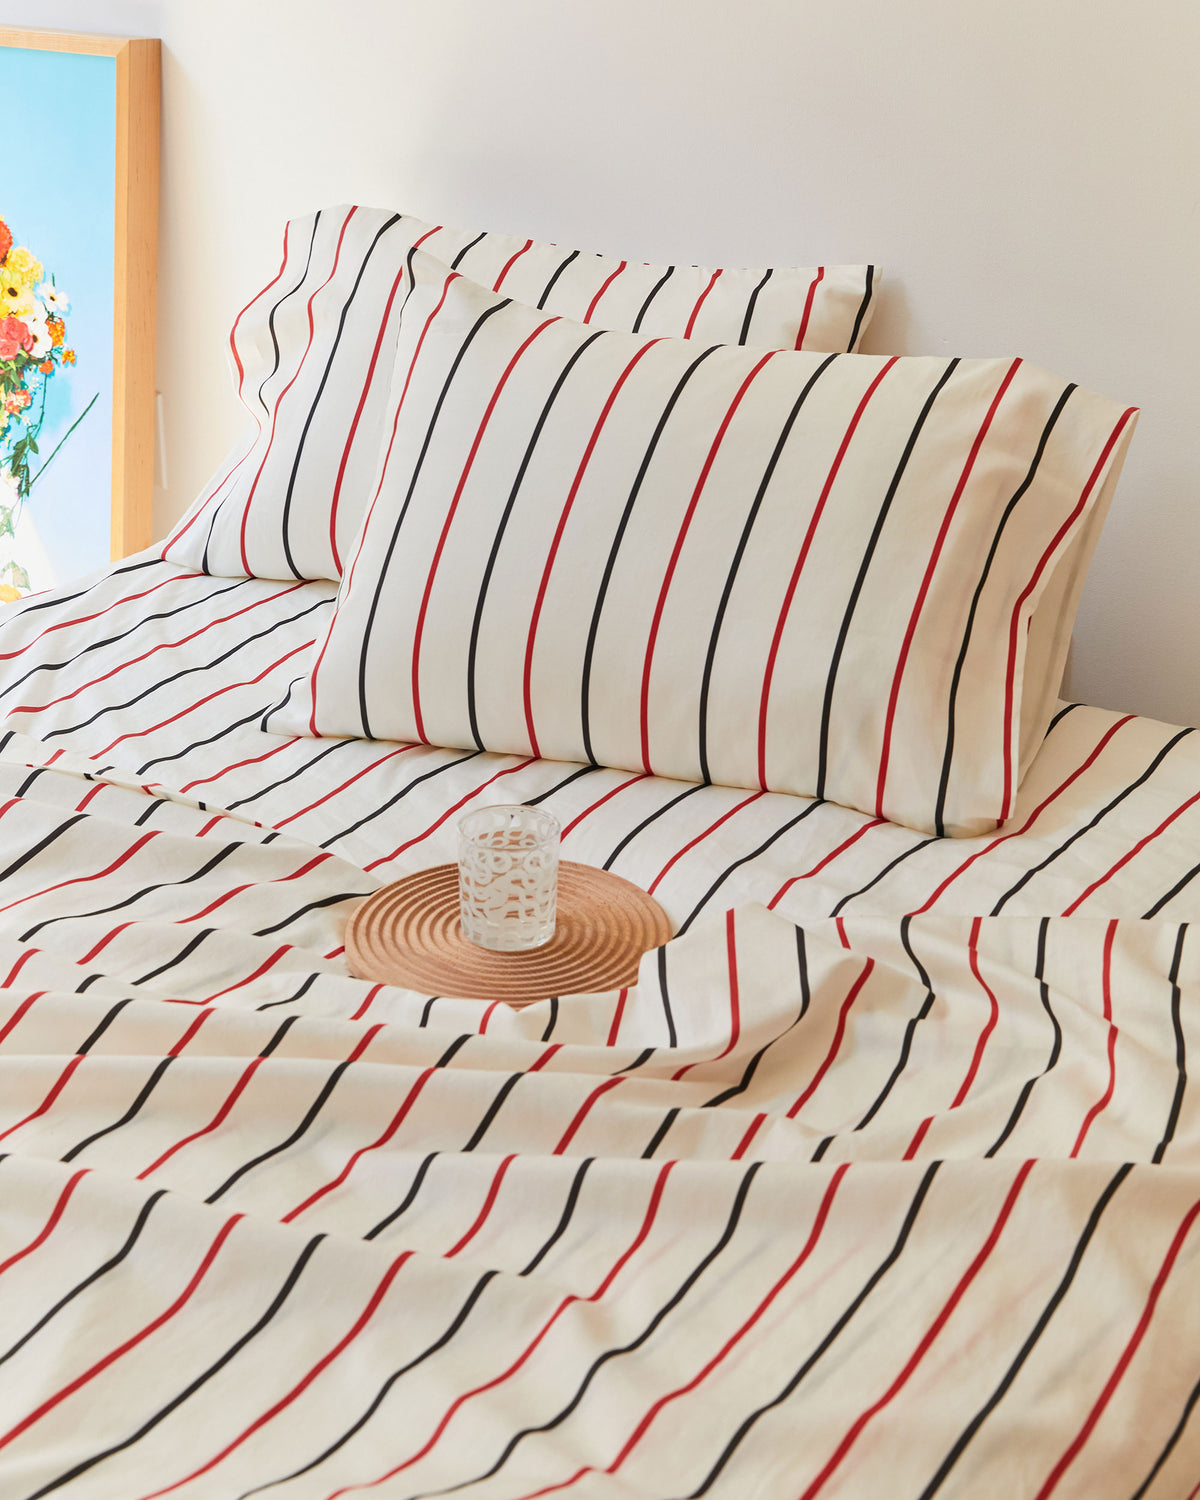 Dusen Dusen Lowlands Stripe Sheets. Sheeting in white, black and red stripes. 100% cotton sateen, 300 thread count. Machine wash cold and tumble dry. Made in Portugal. Our cotton sateen is smooth and cool to the touch and features a slightly lustrous finish.